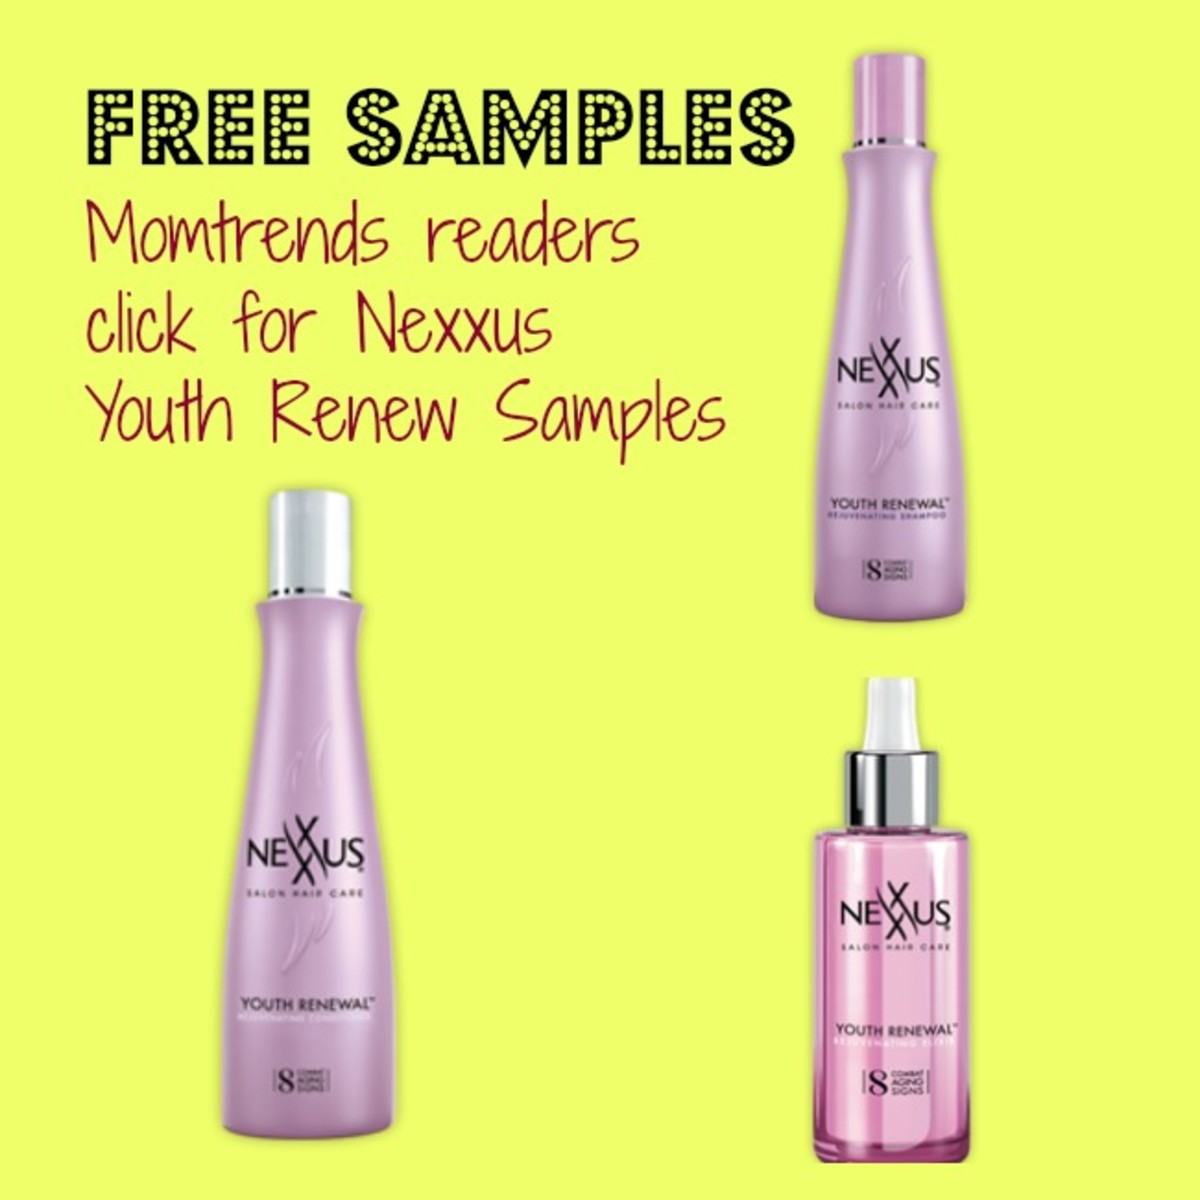 free beauty samples, hair care, nexxus, Nexxus Youth Renewal, younger-looking hair, hair products, momtrends, mom bloggers, fabulous hair after 40